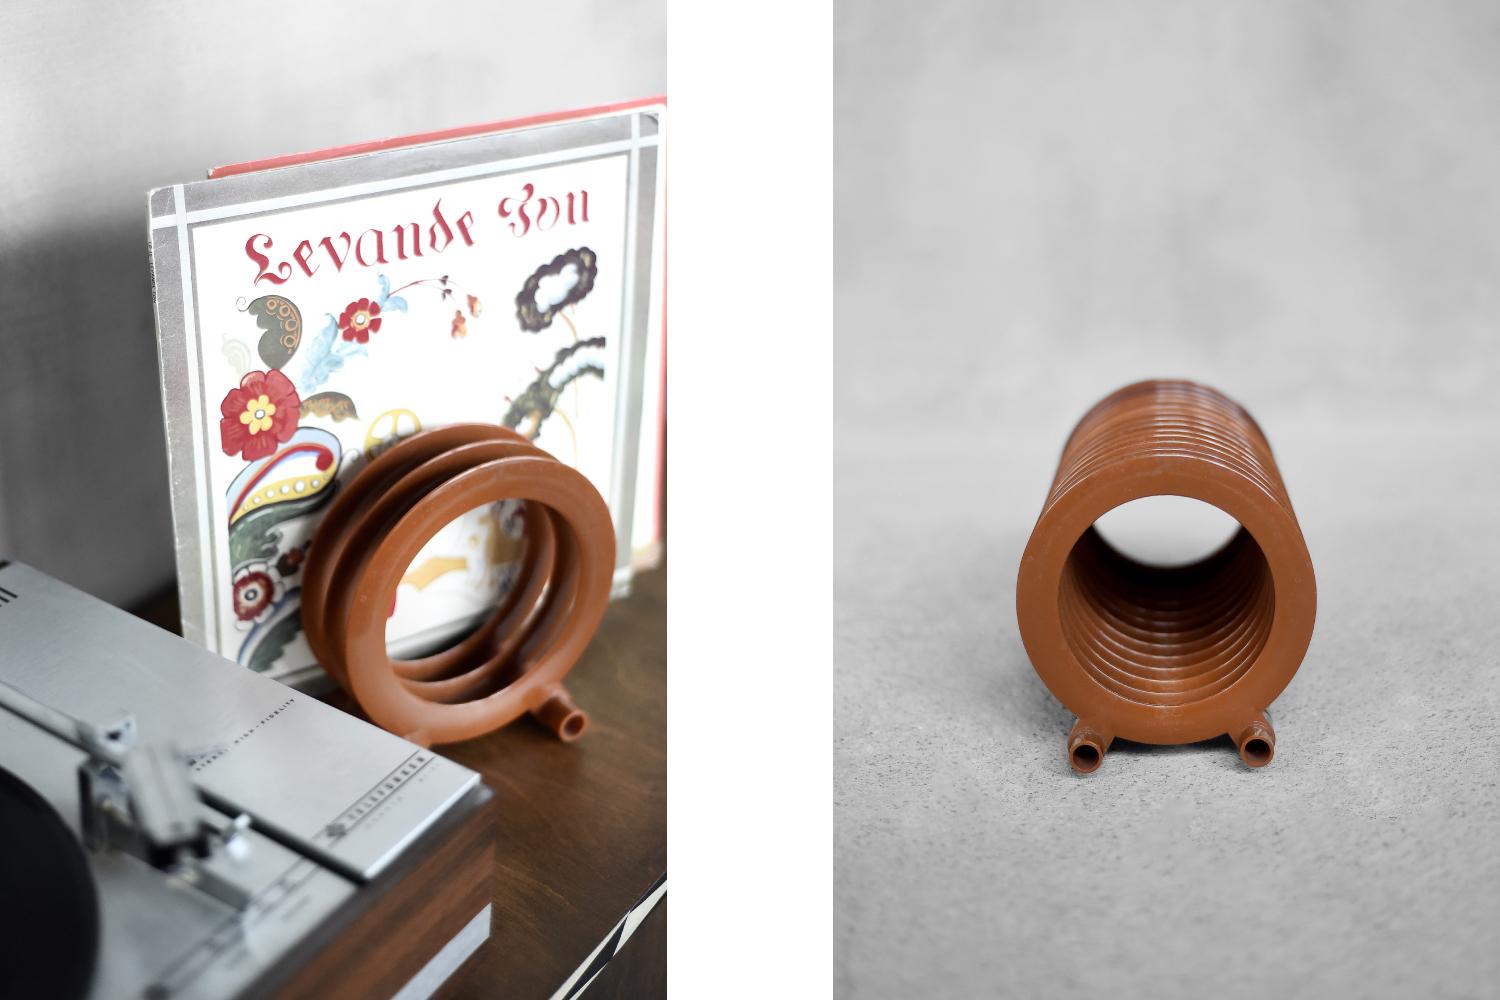 This vintage vinyl record stand was produced by the Polish manufacturer ZZG Veritas during the 1970s. It is made of brown plastic. The stand holds 13 vinyl records and can be expanded by adding extra modules. The number of round modules can be